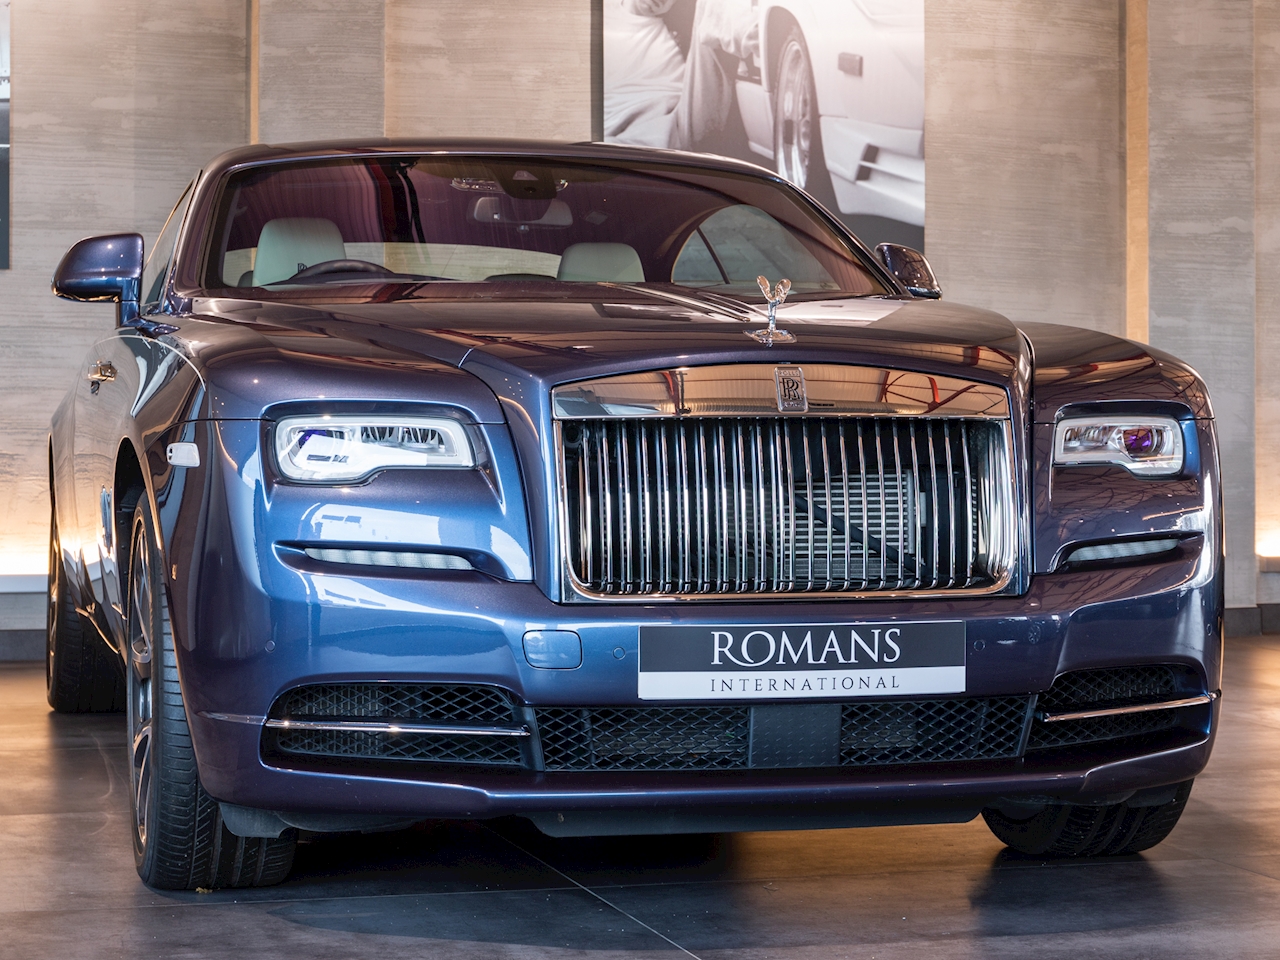 2019 RollsRoyce Wraith  Latest Prices Reviews Specs Photos and  Incentives  Autoblog